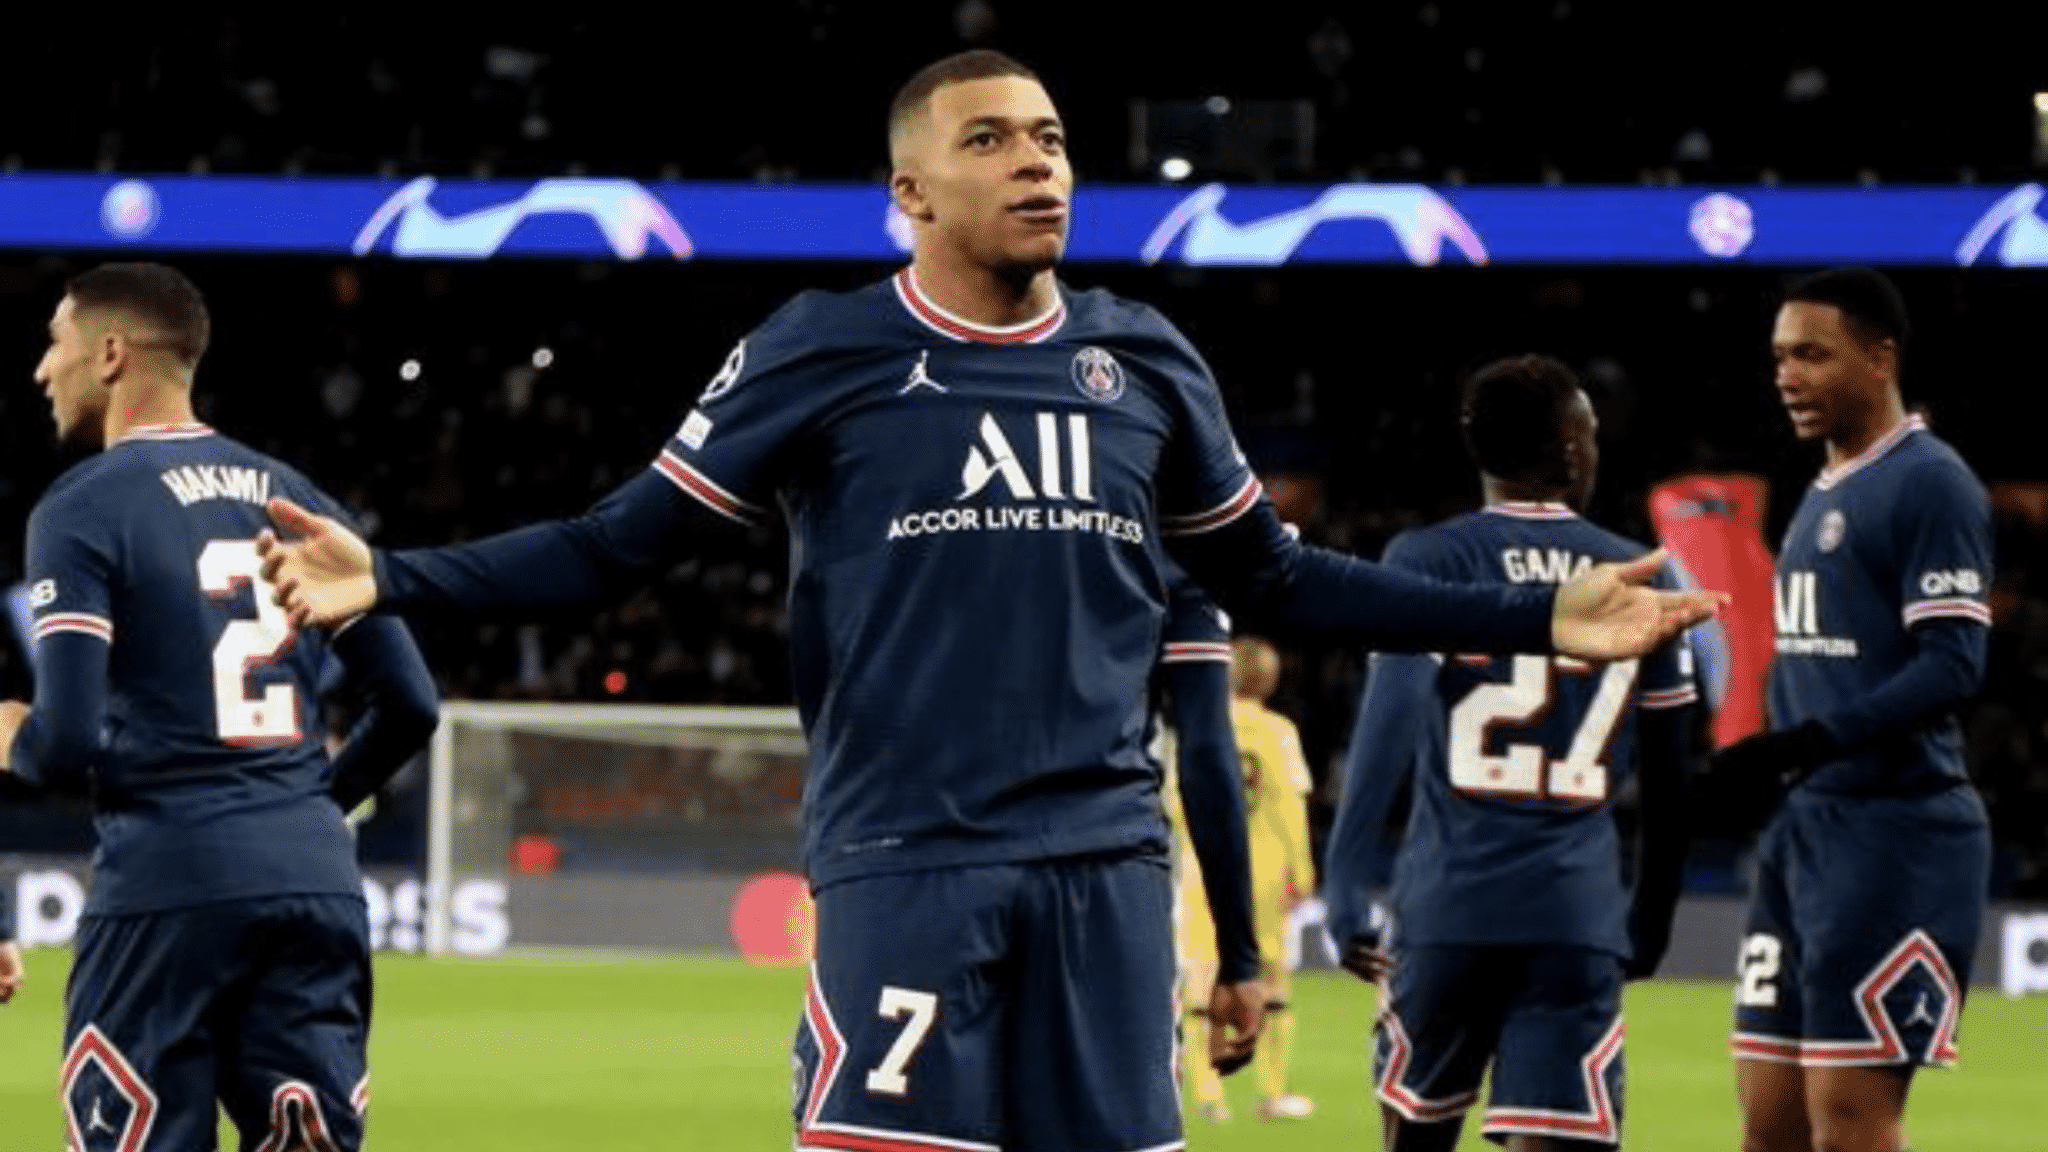 Real Madrid increasingly confident of signing Mbappe this summer, My Football Facts